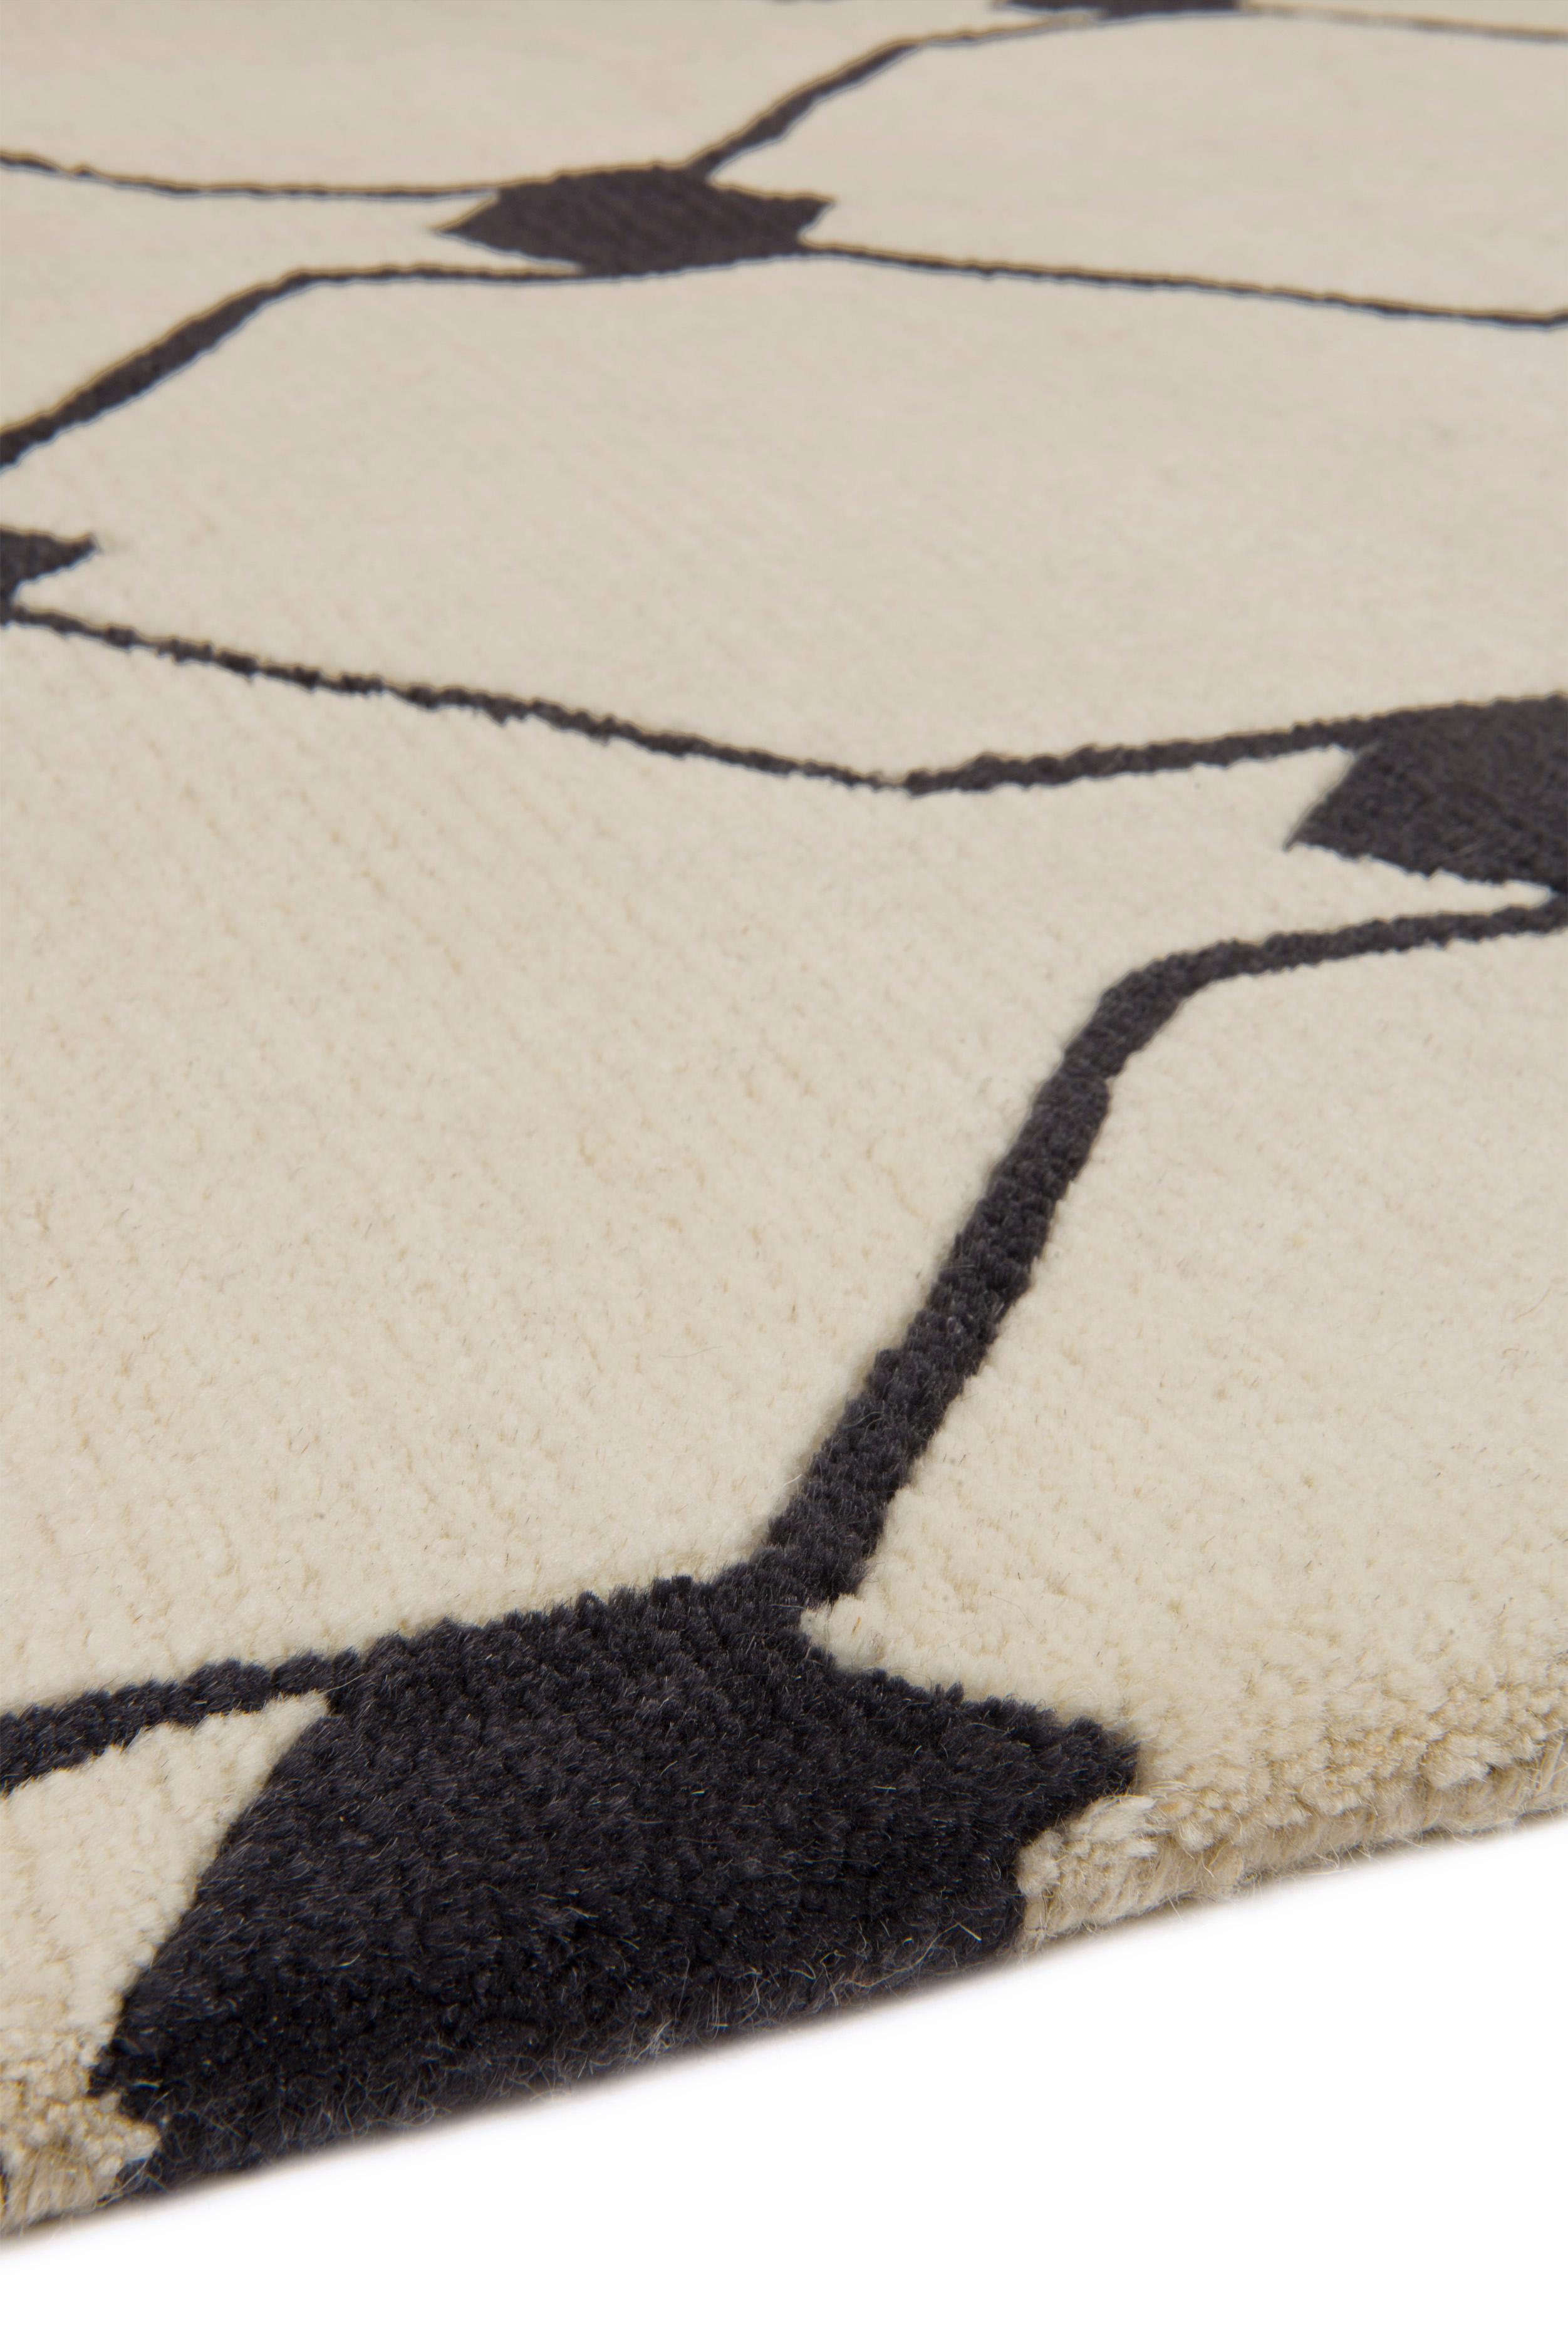 This rug is chunkily hand-knotted from natural cream and deep blue Tibetan wool, and has a deliciously soft deep pile. Available from stock in a range of sizes, rugs in the Studio Collection cannot be custom ordered to size or color. Sold per square